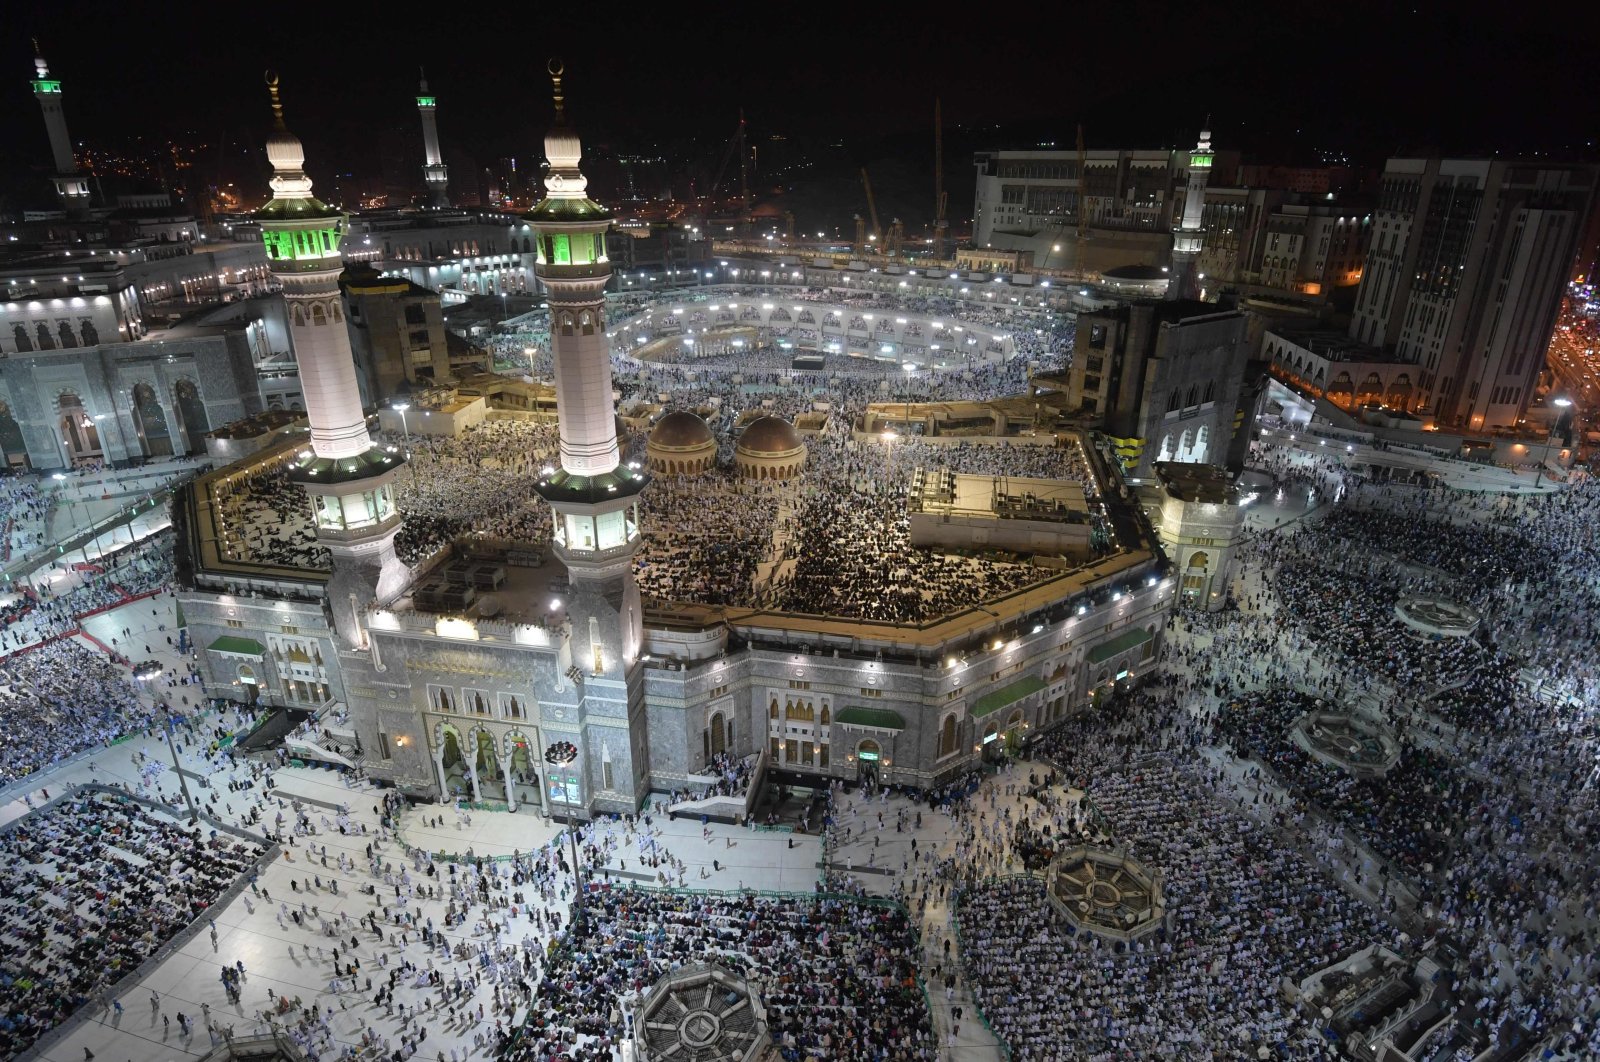 Muslim pilgrims gather at the Grand Mosque in Saudi Arabia&#039;s holy city of Mecca prior to the start of the annual Hajj pilgrimage in the holy city, Mecca, Saudi Arabia, Aug. 7, 2019. (AFP File Photo)